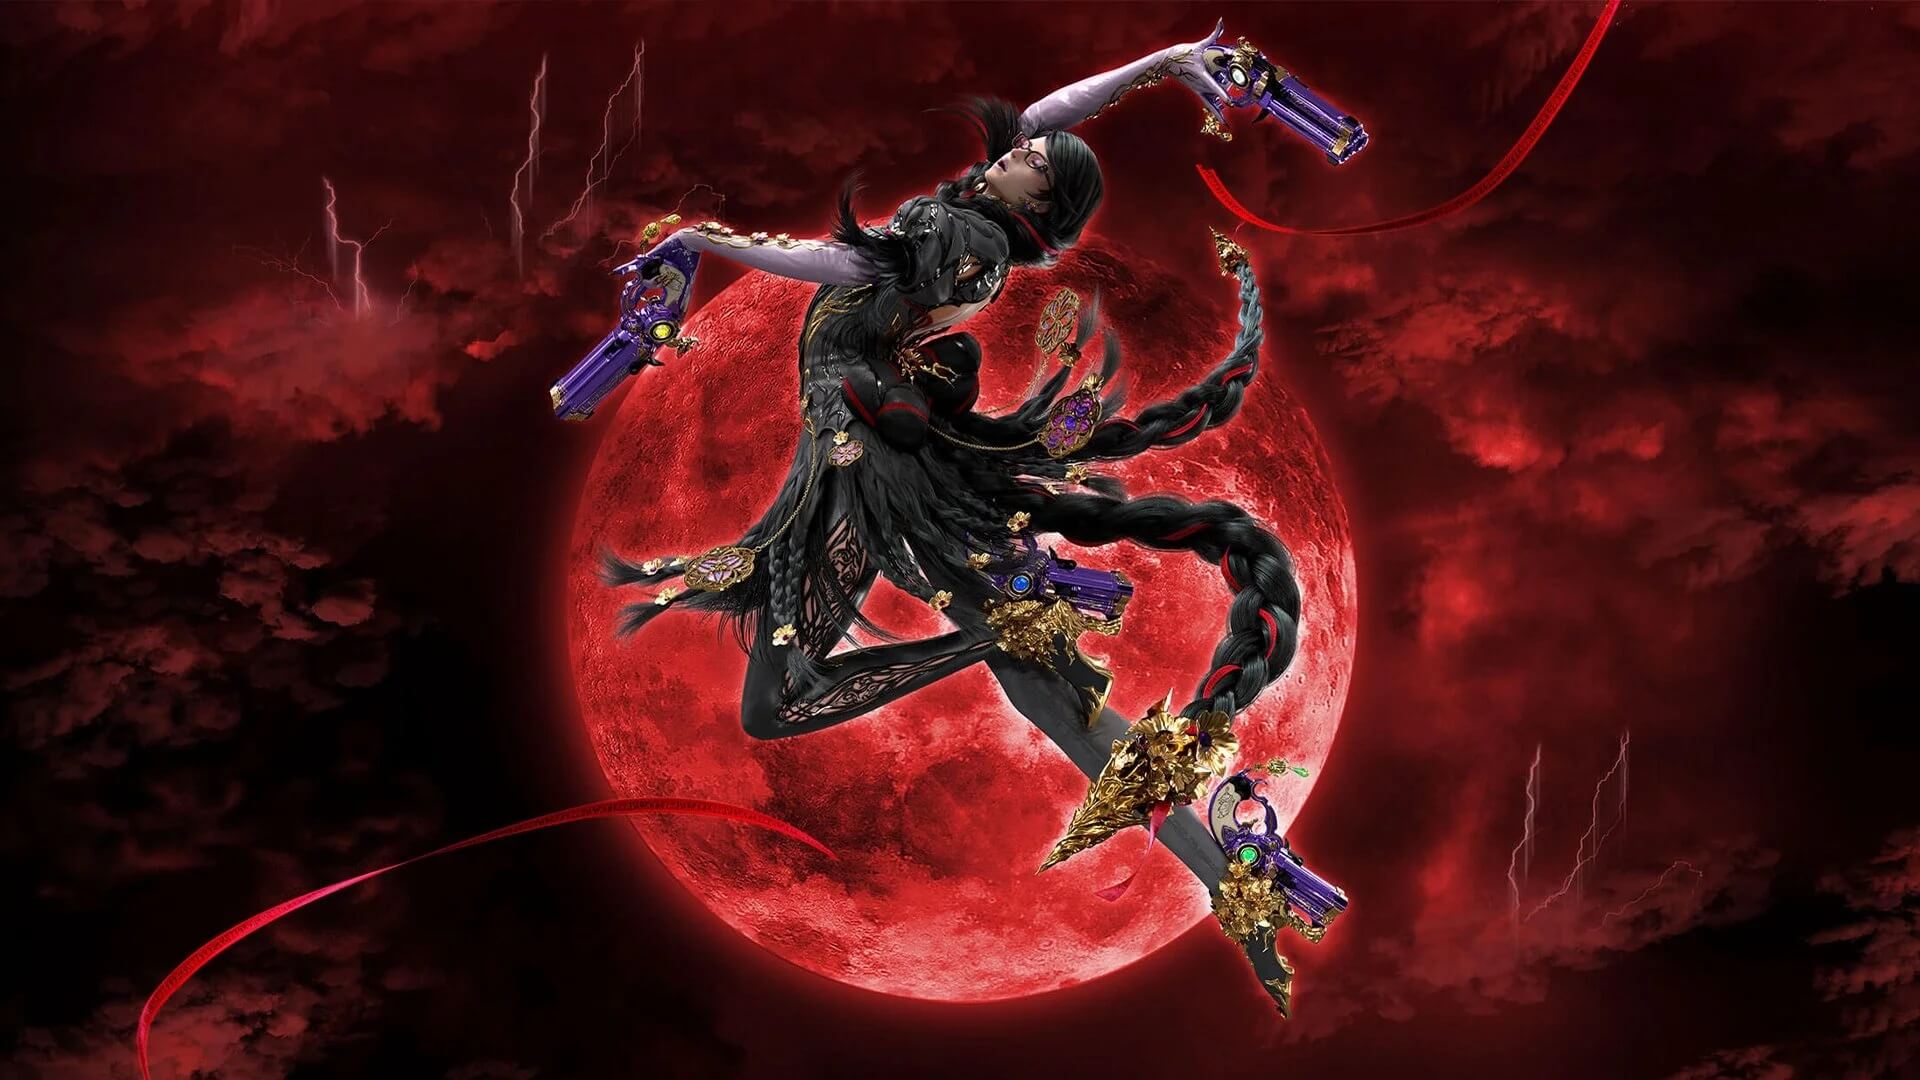 Nintendo Switch Leaker Reveals Bayonetta 3 Will Be a Video Game